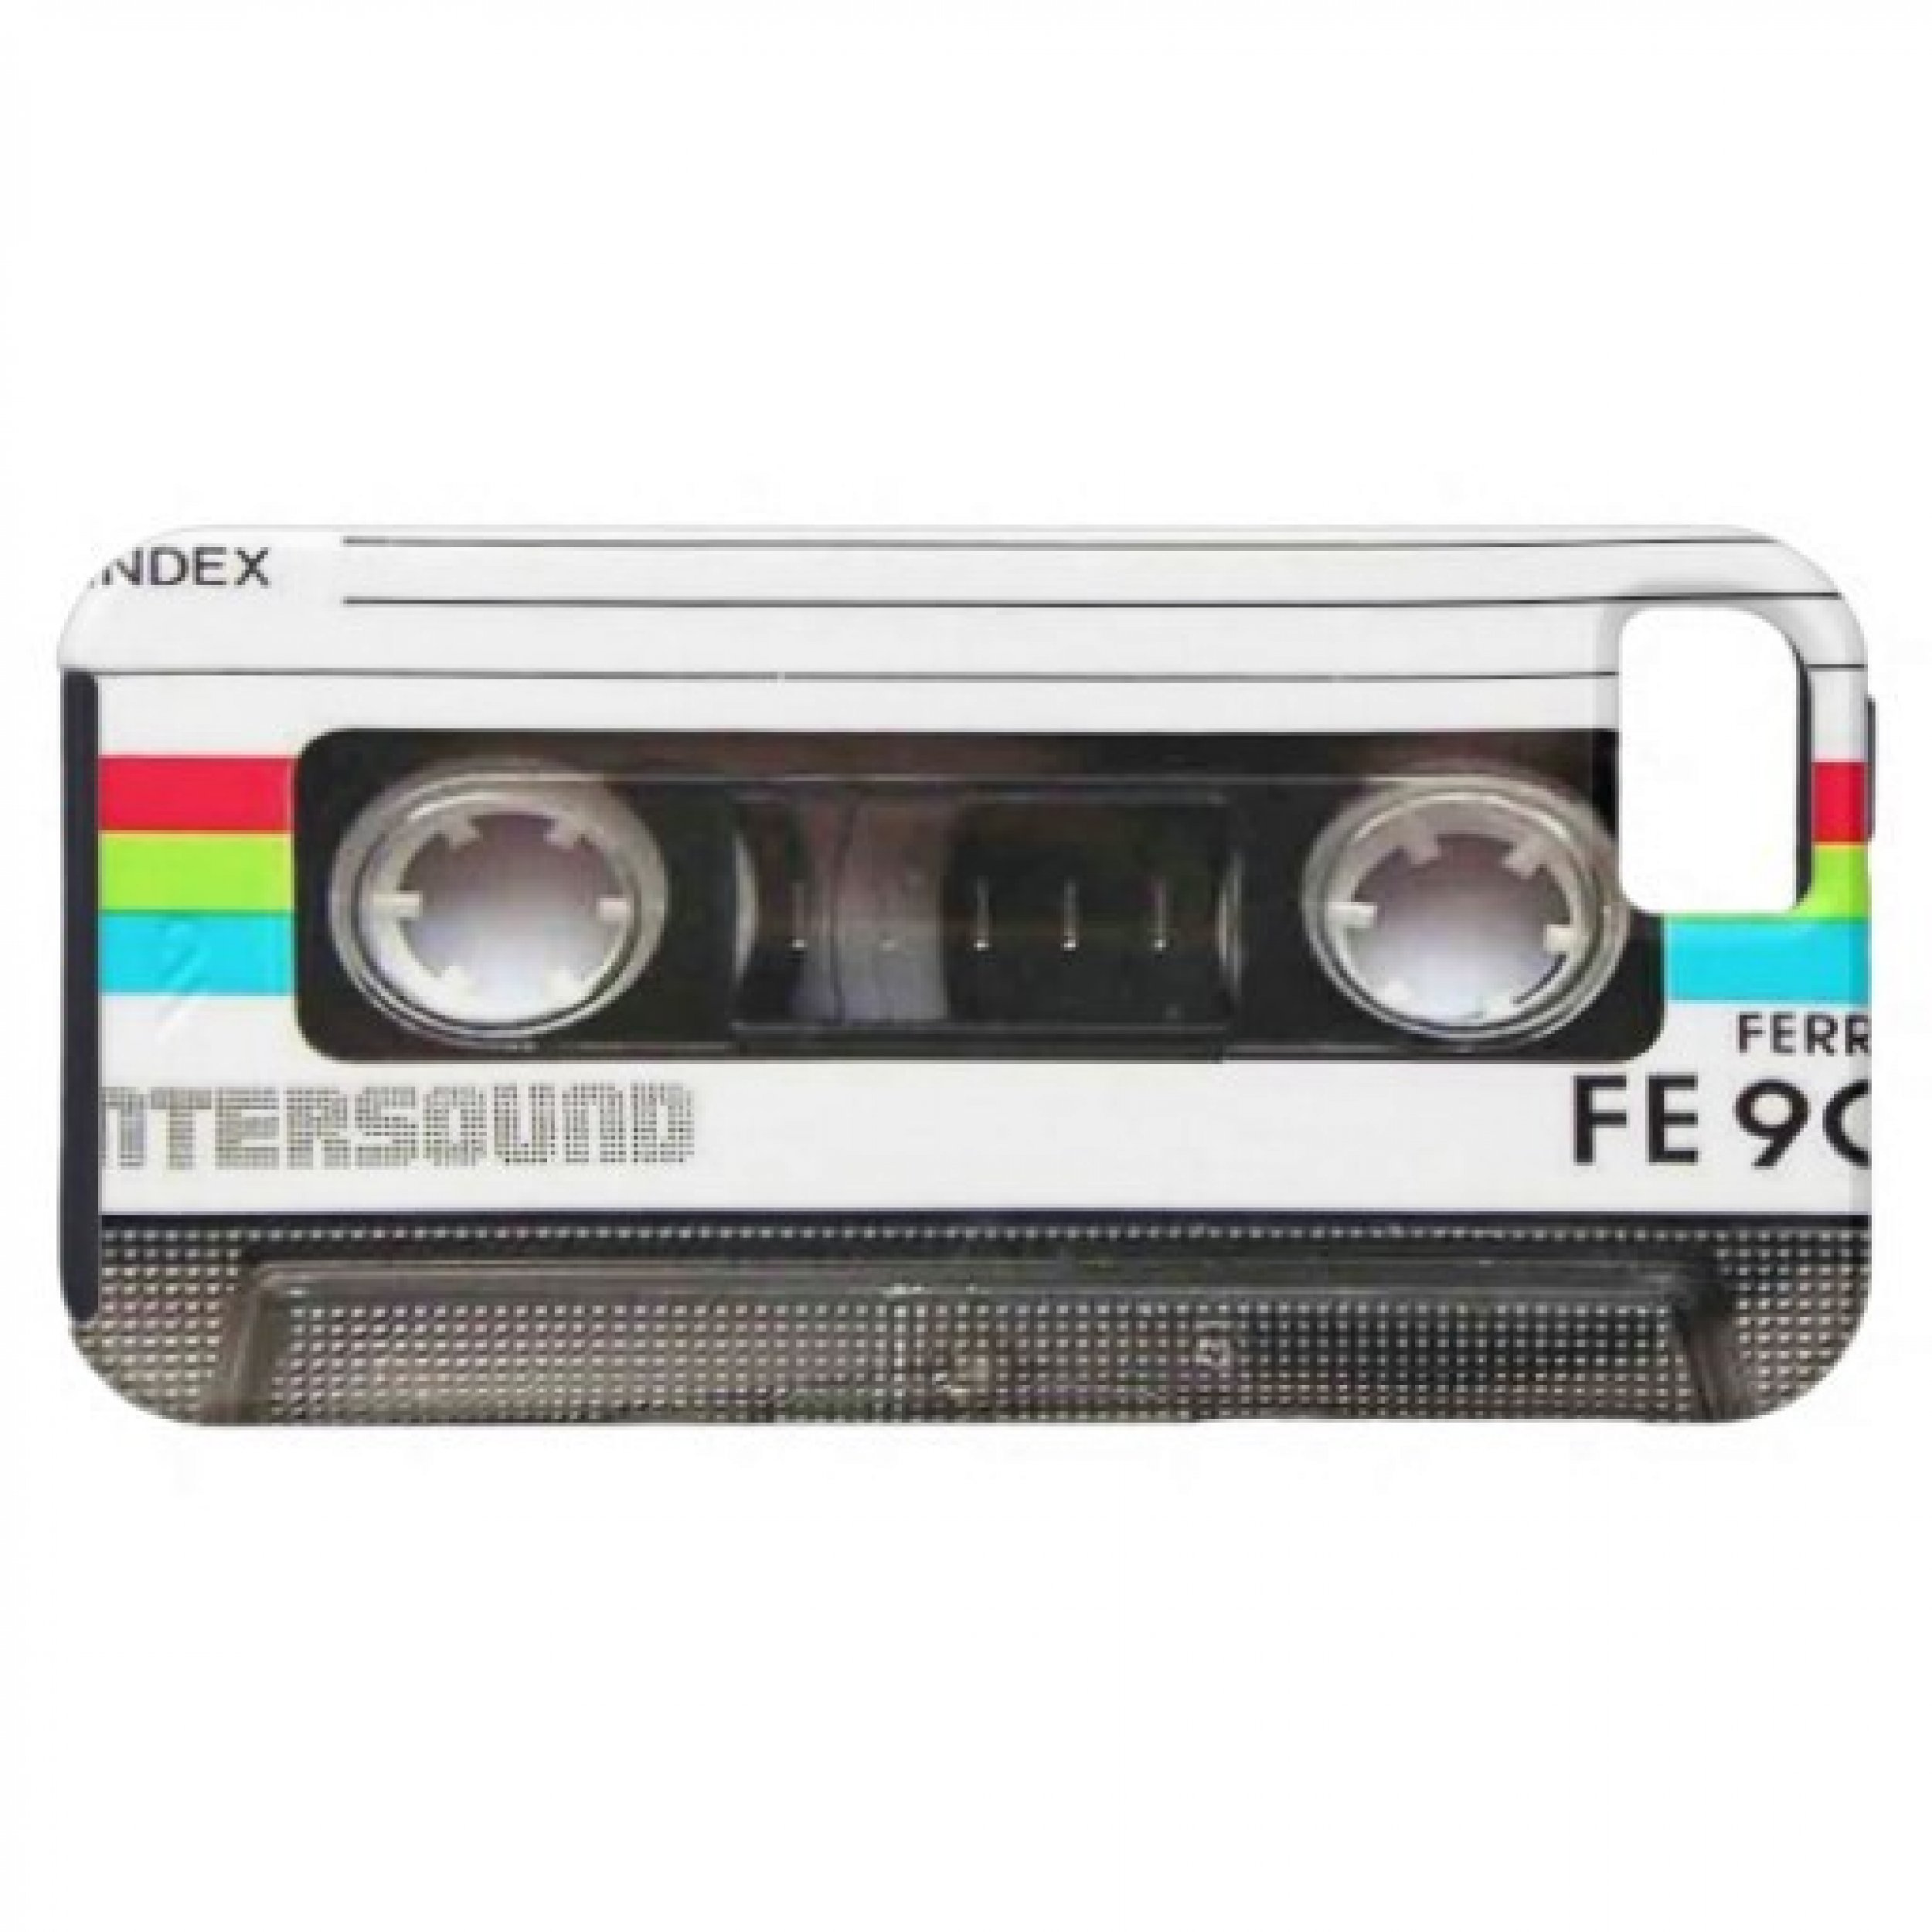 9. Cassette Tape iPhone 5 Cover -Available for 44.95 